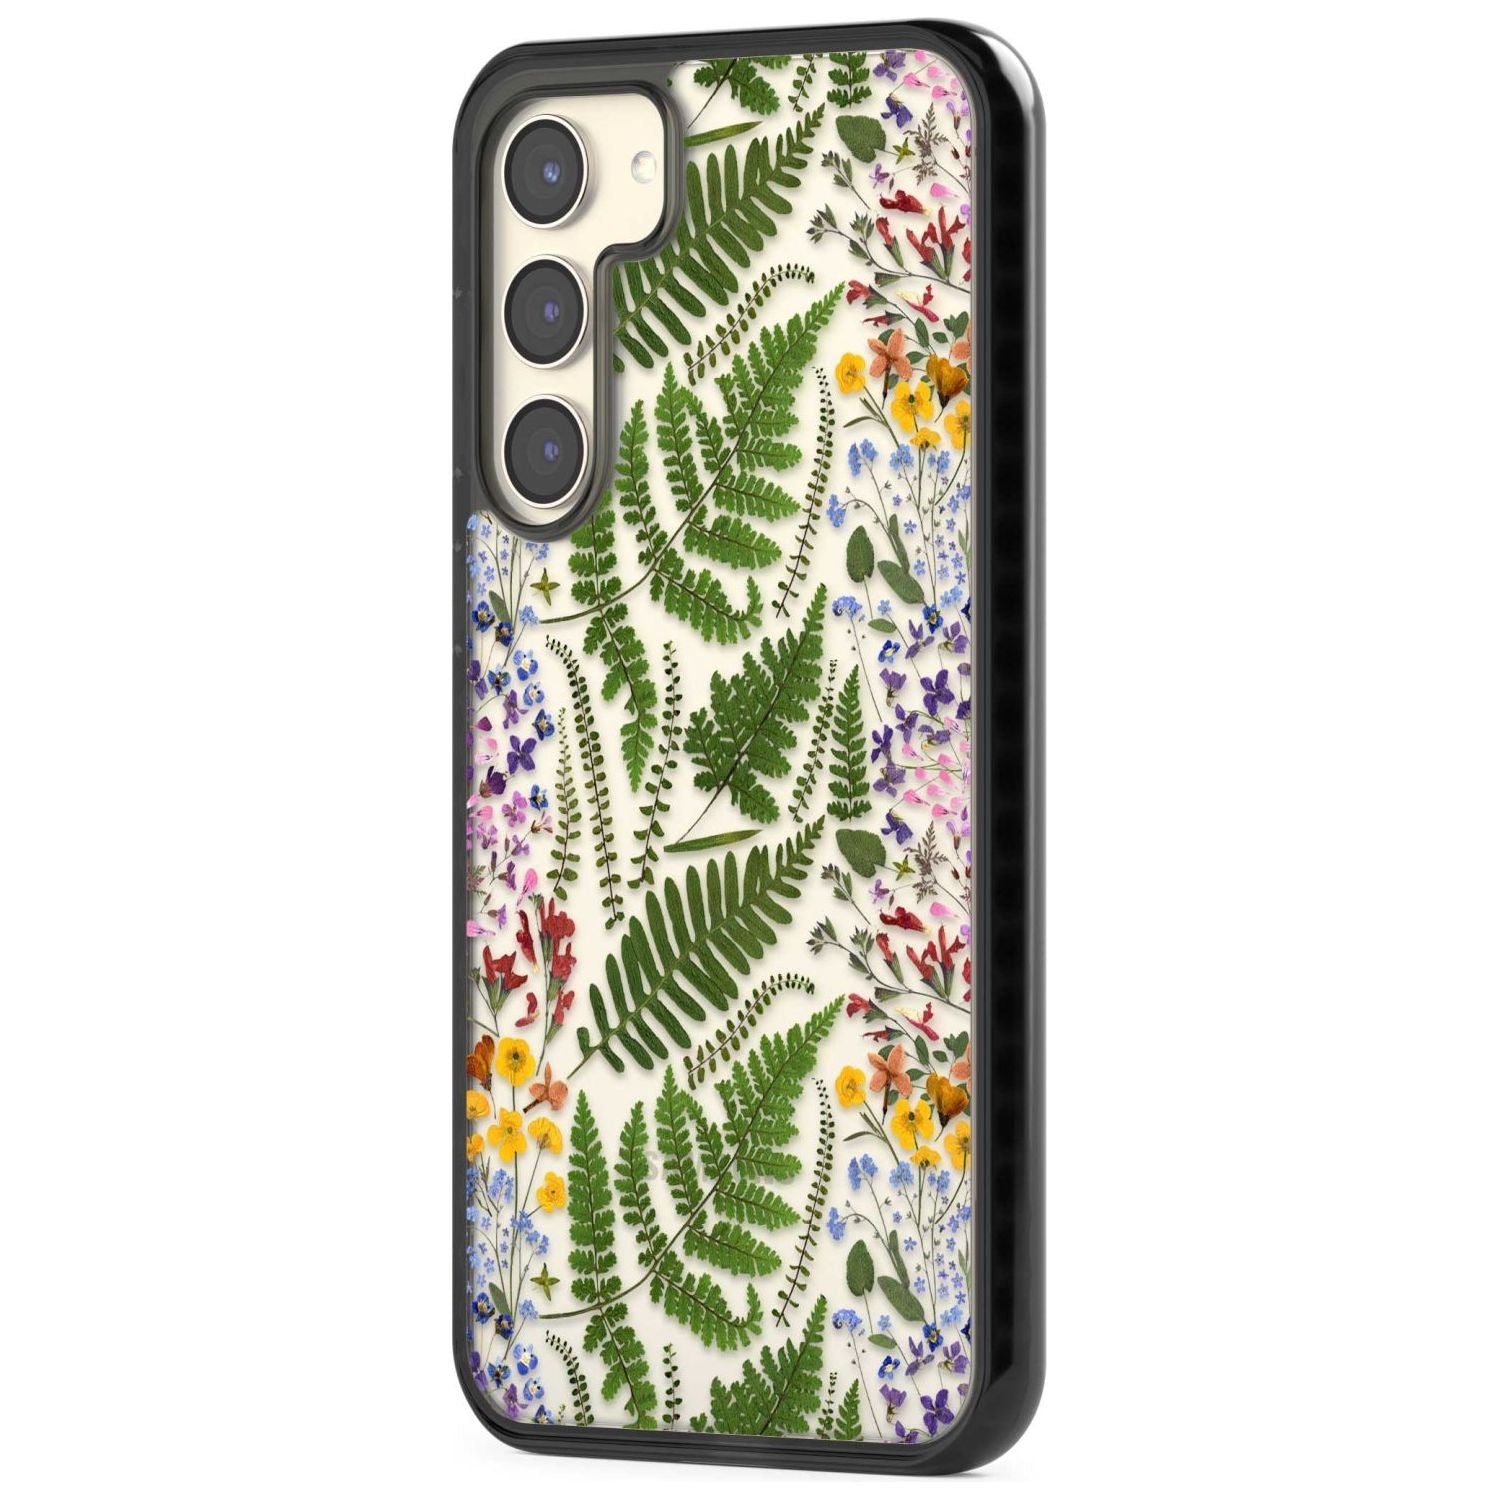 Busy Floral and Fern Design Phone Case iPhone 15 Pro Max / Black Impact Case,iPhone 15 Plus / Black Impact Case,iPhone 15 Pro / Black Impact Case,iPhone 15 / Black Impact Case,iPhone 15 Pro Max / Impact Case,iPhone 15 Plus / Impact Case,iPhone 15 Pro / Impact Case,iPhone 15 / Impact Case,iPhone 15 Pro Max / Magsafe Black Impact Case,iPhone 15 Plus / Magsafe Black Impact Case,iPhone 15 Pro / Magsafe Black Impact Case,iPhone 15 / Magsafe Black Impact Case,iPhone 14 Pro Max / Black Impact Case,iPhone 14 Plus /